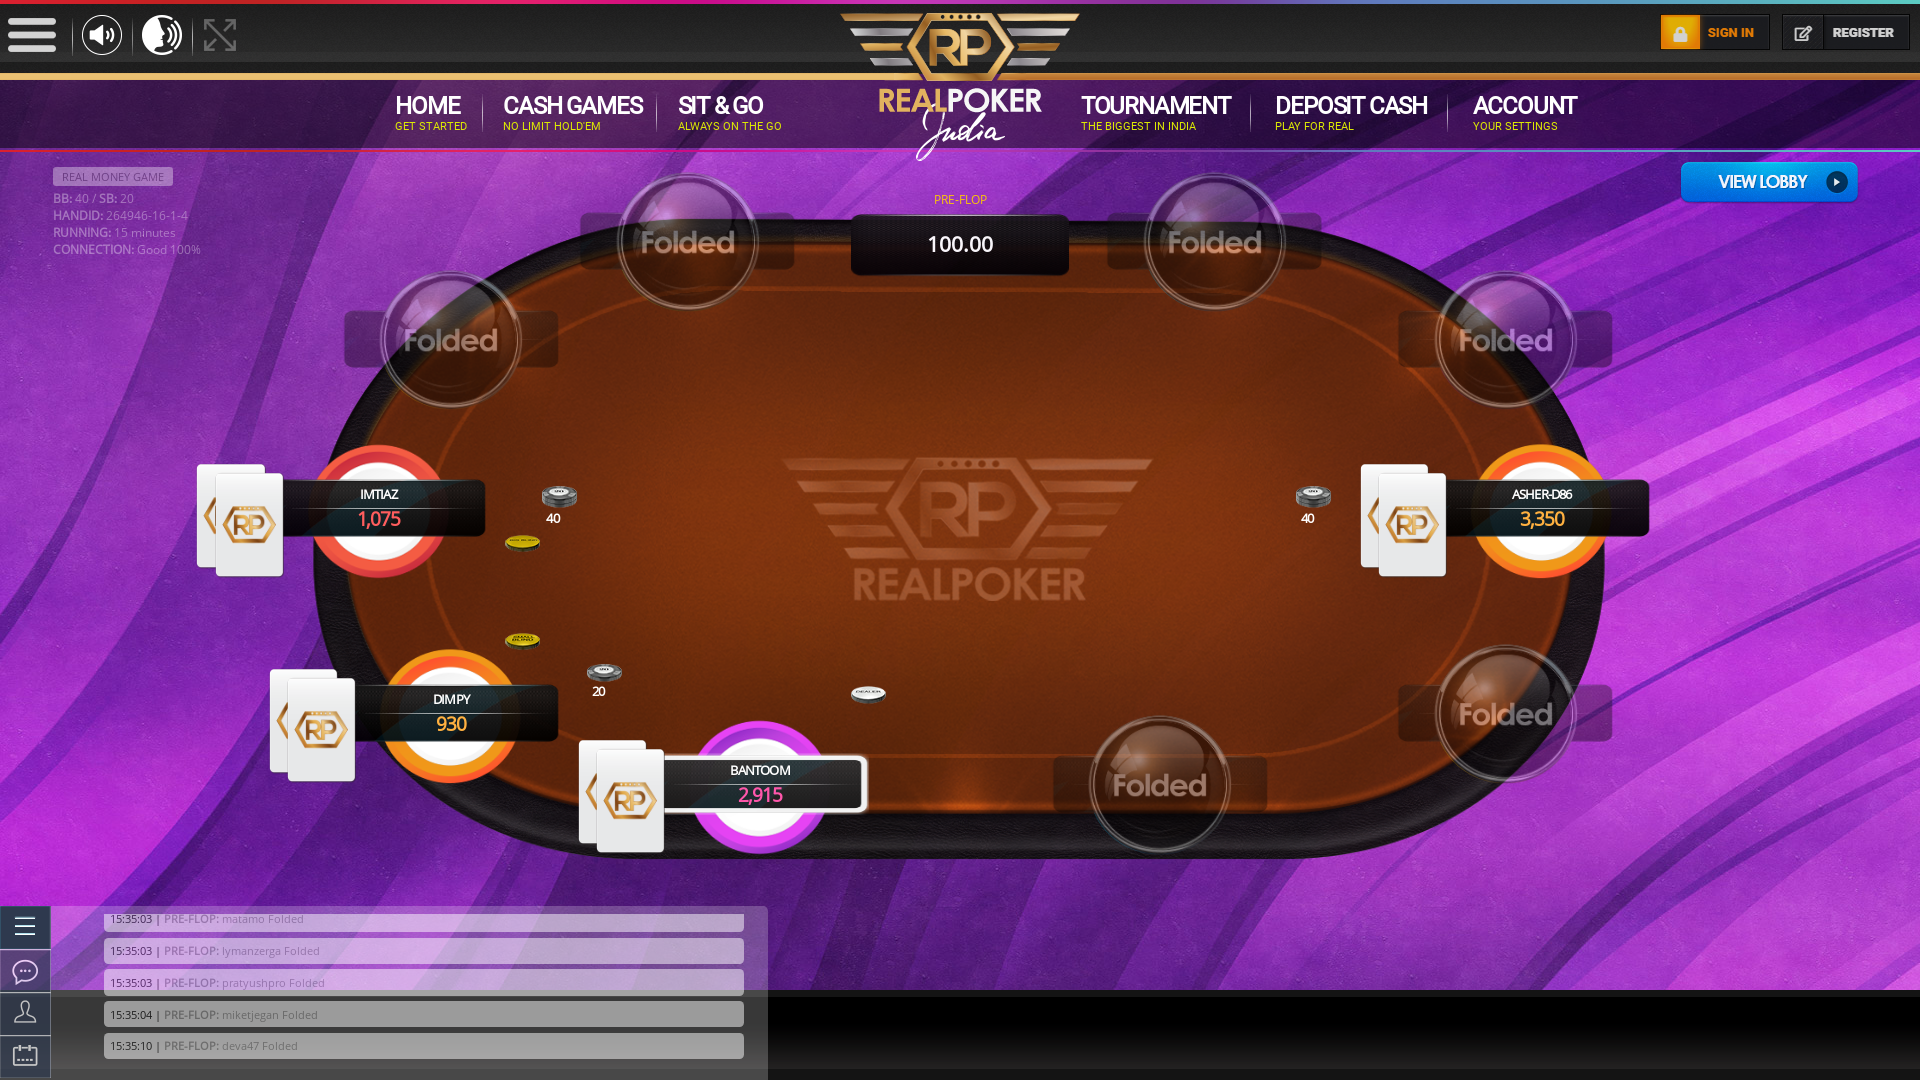 Real poker 10 player table in the 14th minute